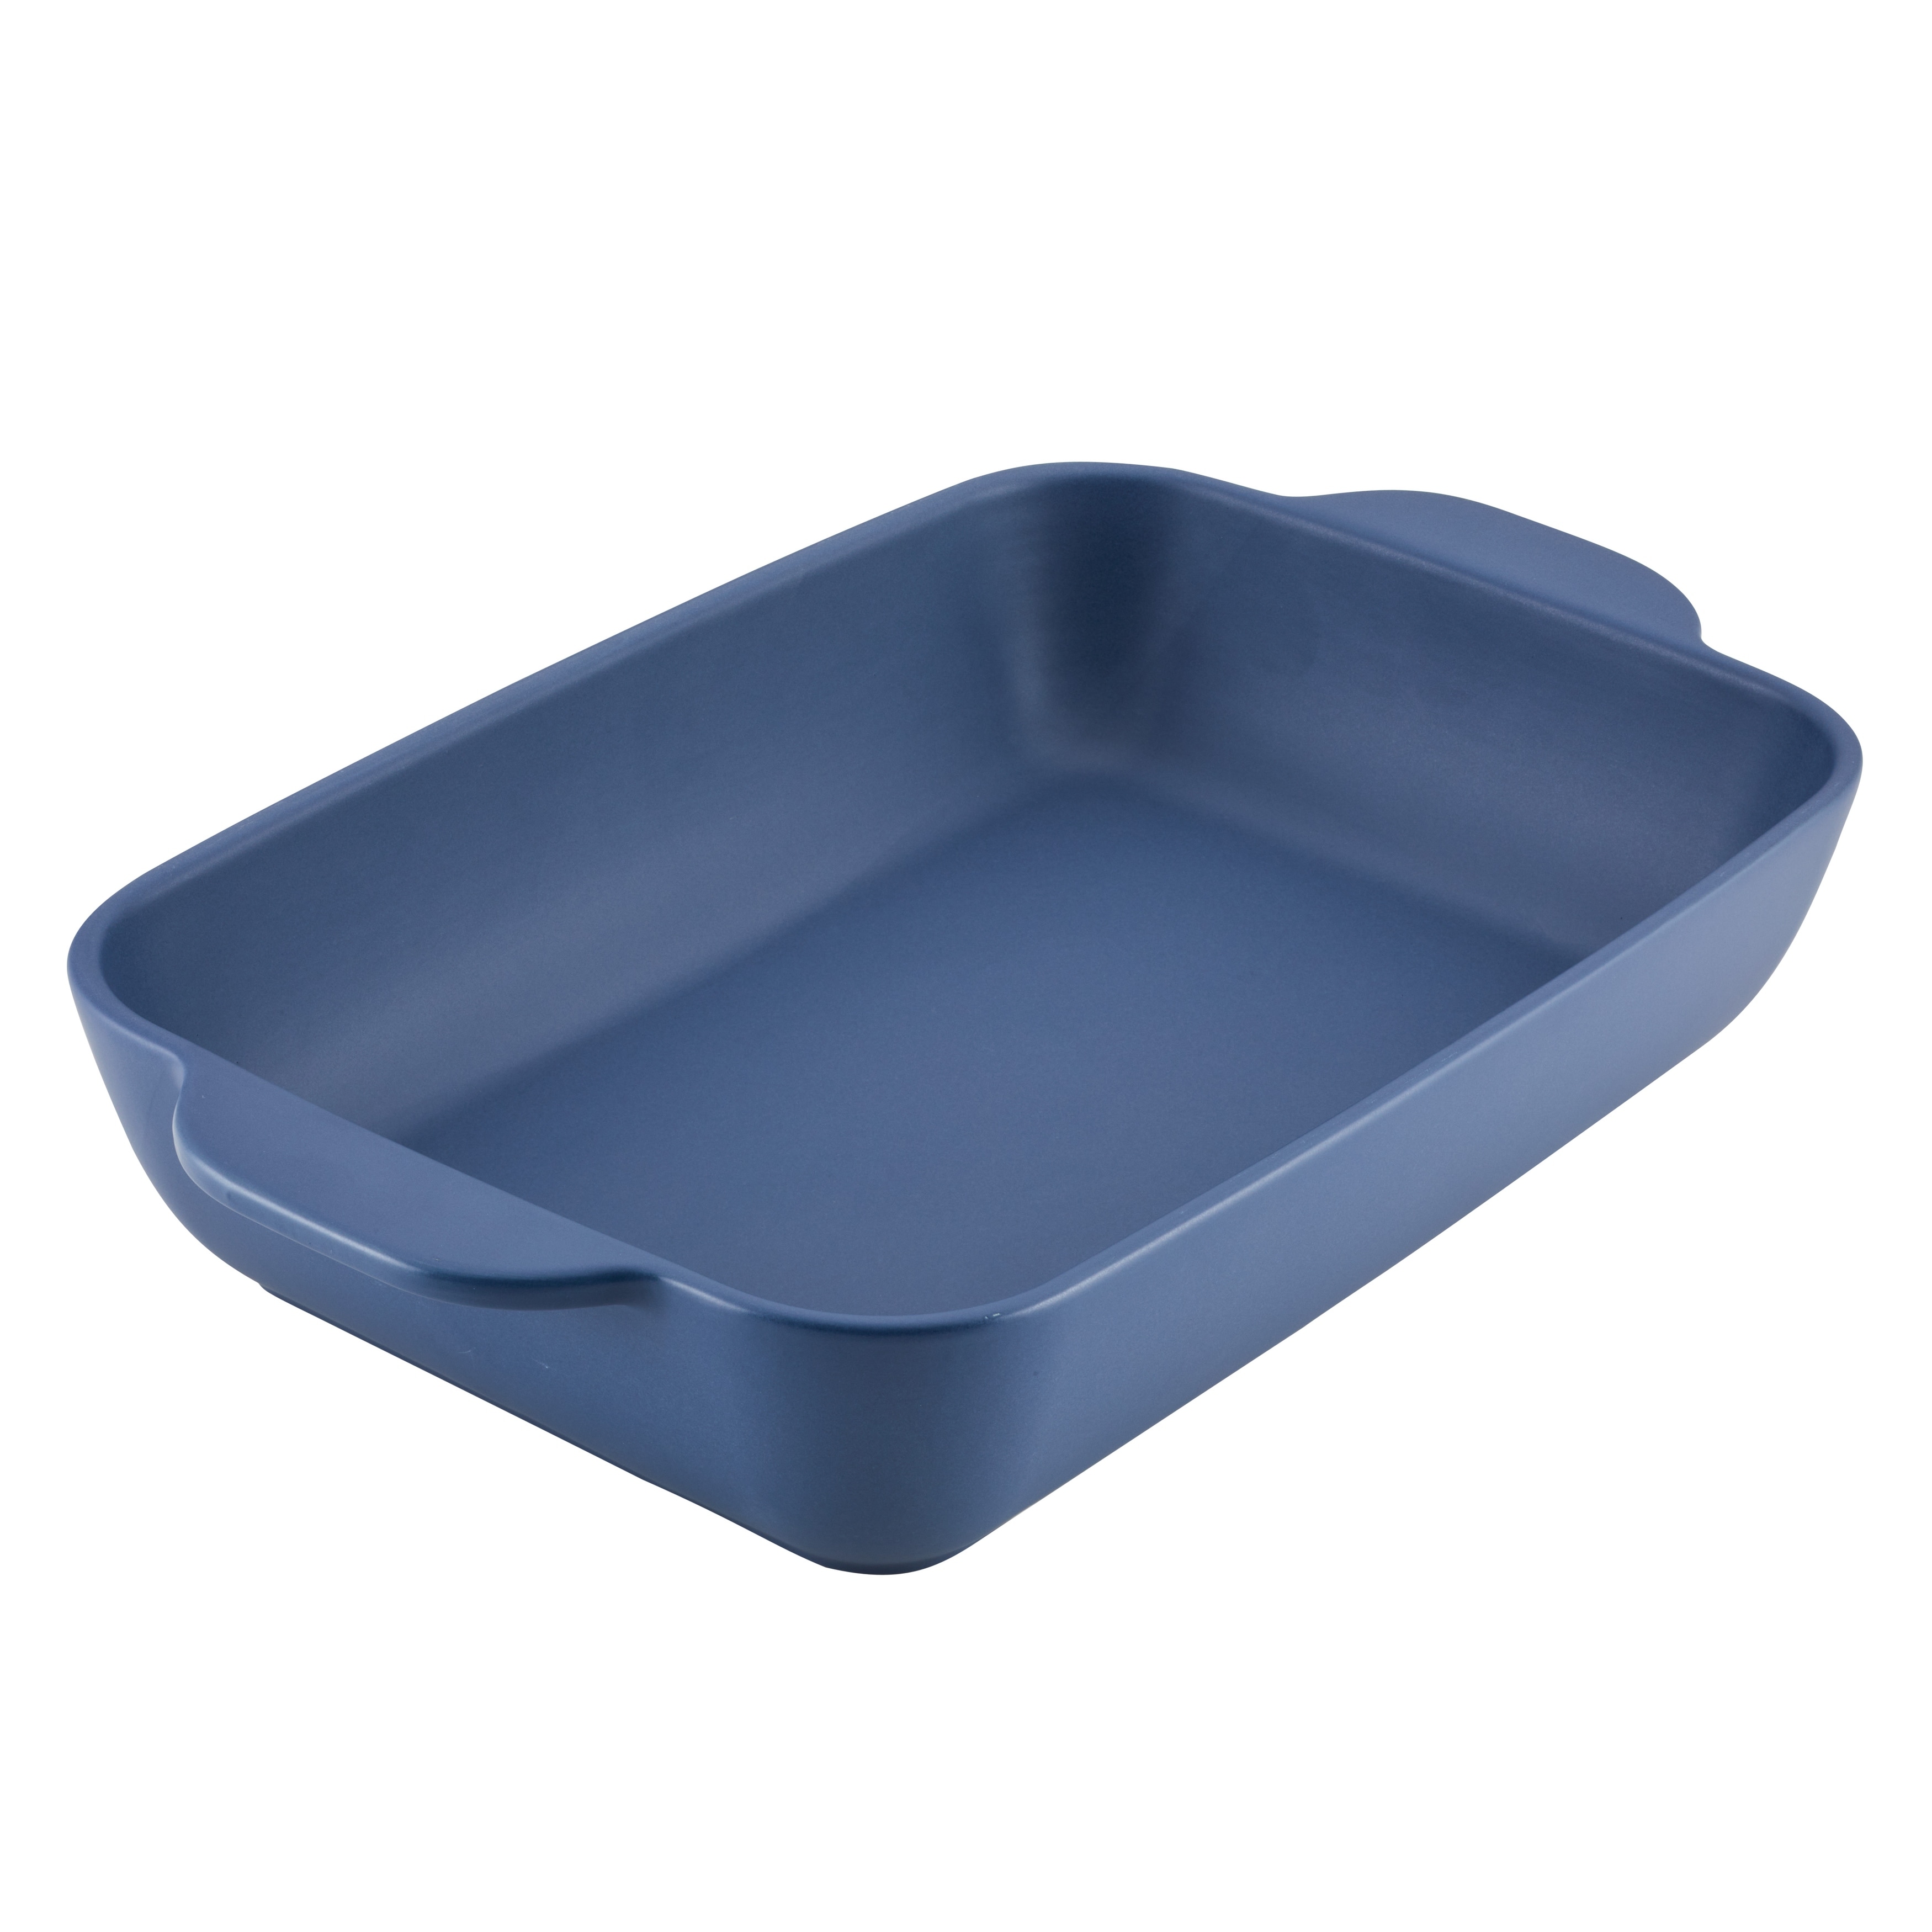 https://ak1.ostkcdn.com/images/products/is/images/direct/8f42f4fc76eedad85370ca0129012c2a05ab5d87/Ayesha-Curry-Rectangular-Ceramic-Baking-Dish%2C-9-Inch-x-13-Inch%2C-Redwood-Red.jpg